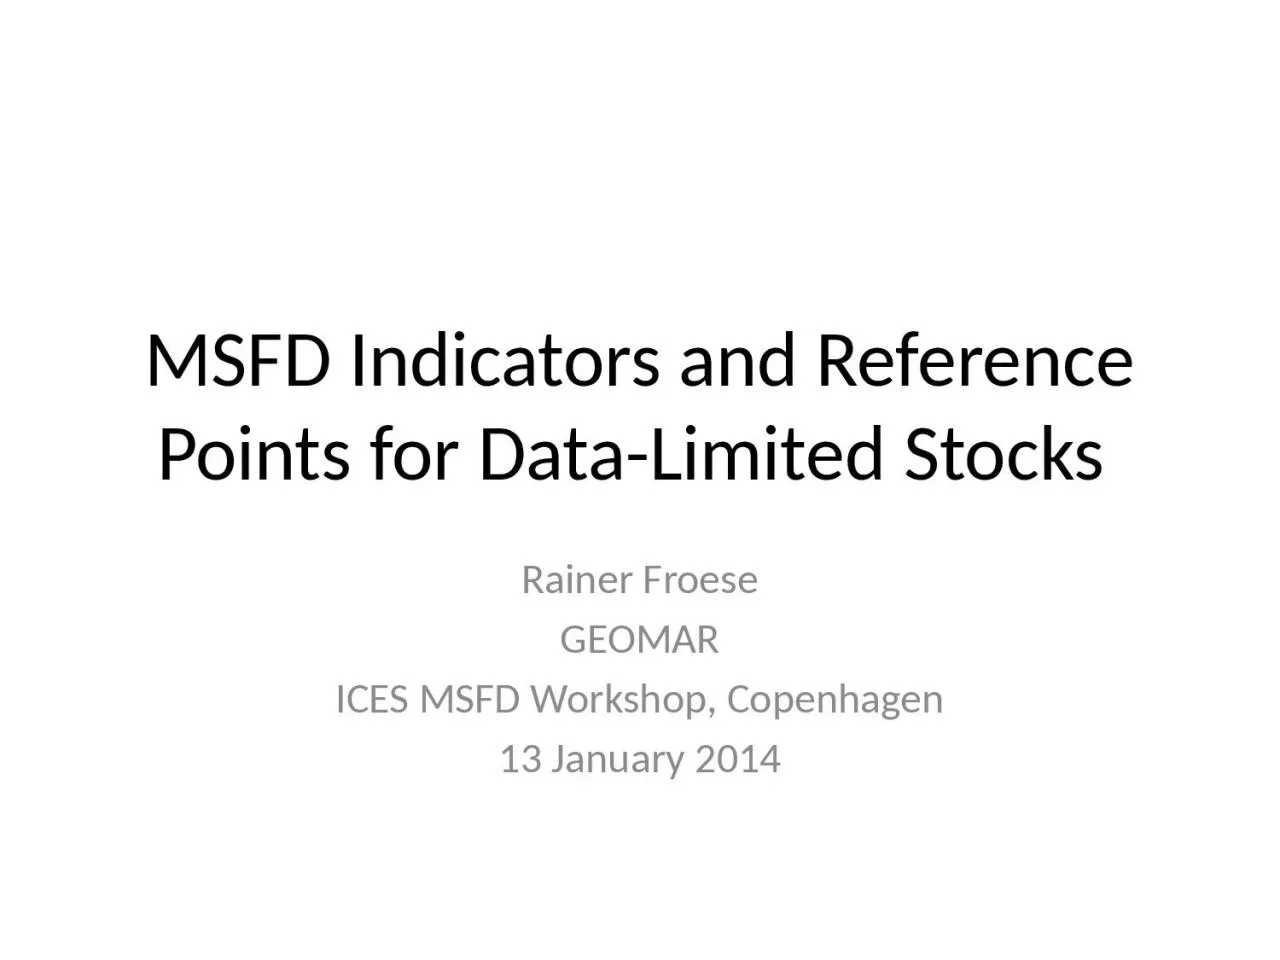 MSFD Indicators and Reference Points for Data-Limited Stocks